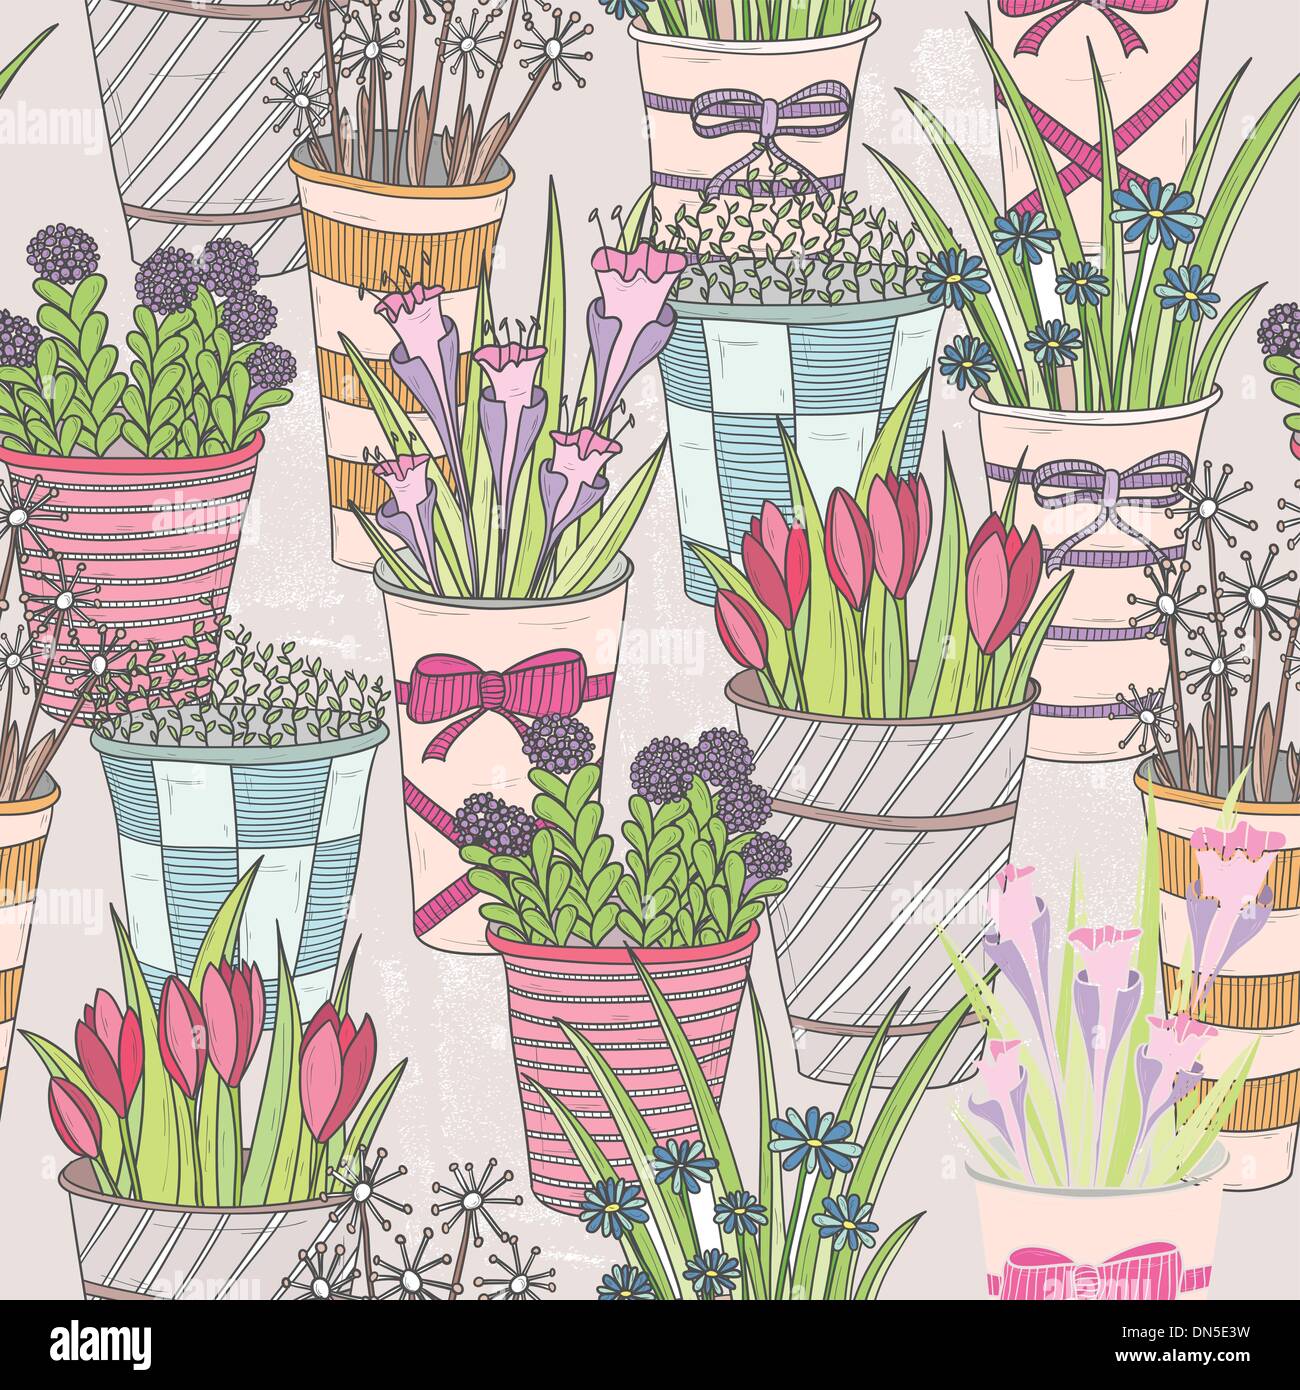 Cute seamless floral pattern. Pattern with flowers in buckets. Stock Vector